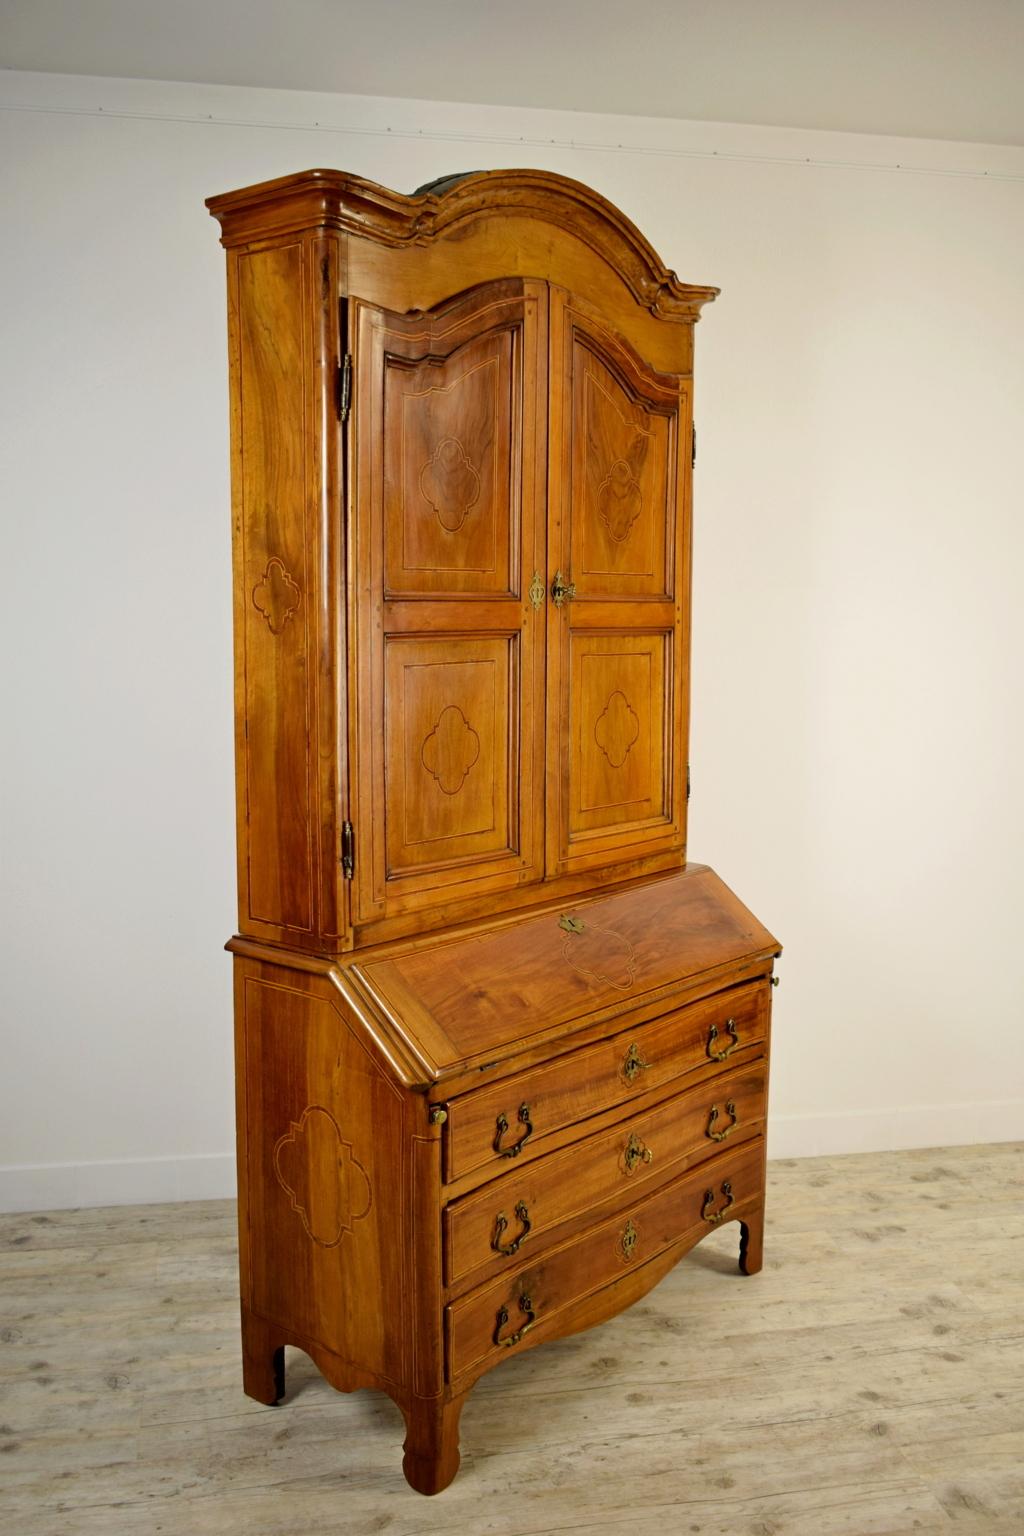 18th century, Italian solid walnut wood Trumeau 

Measures: height cm 239, width cm 122, depth cm 52, depth raised cm 30

Elegant Trumeau, made in piedmont, north of Italy, in the 18th century.
This piece of furniture in solid walnut wood, with